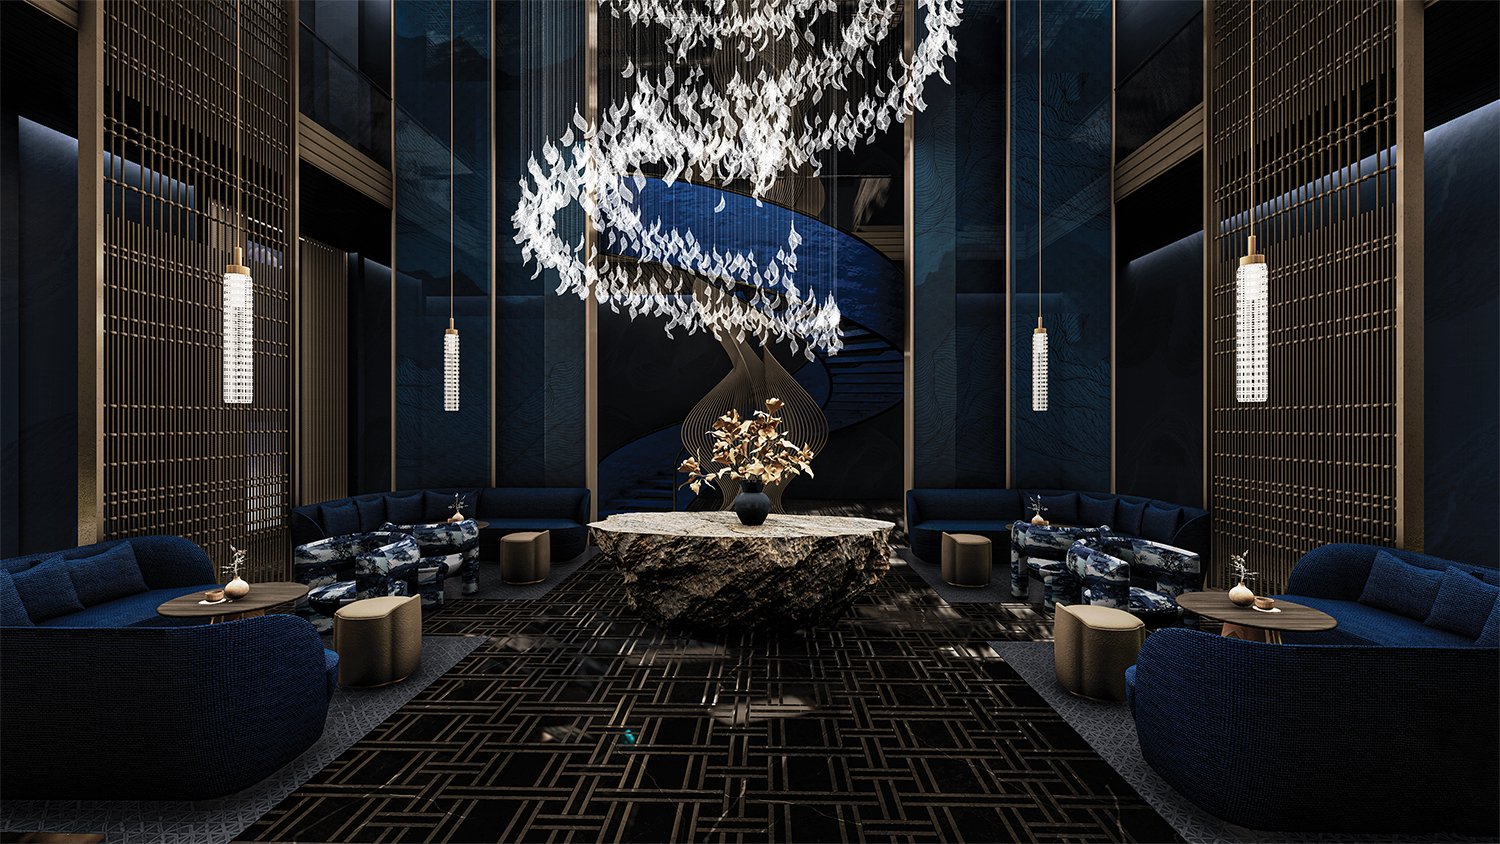  Hotel Le Cirque project designed by Sarah Choudhary ’23 (MFA2. AWARDS: 2023 Hospitality Design Award &amp; 2022 LIV Hospitality Design Awards Emerging Interior Designer of the Year. 